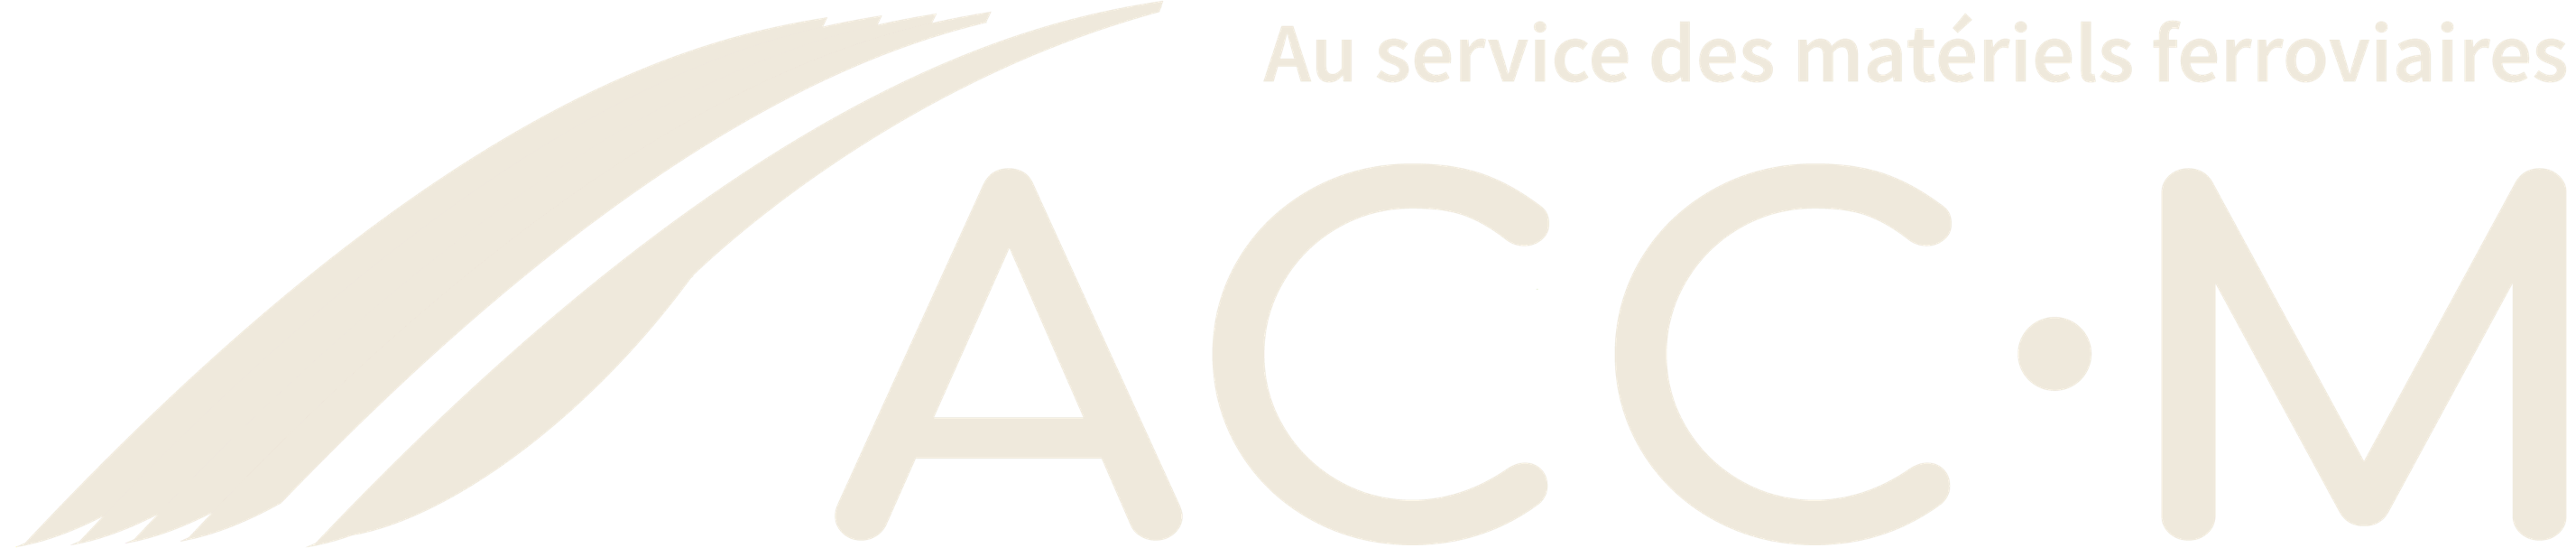 ACCM adapted